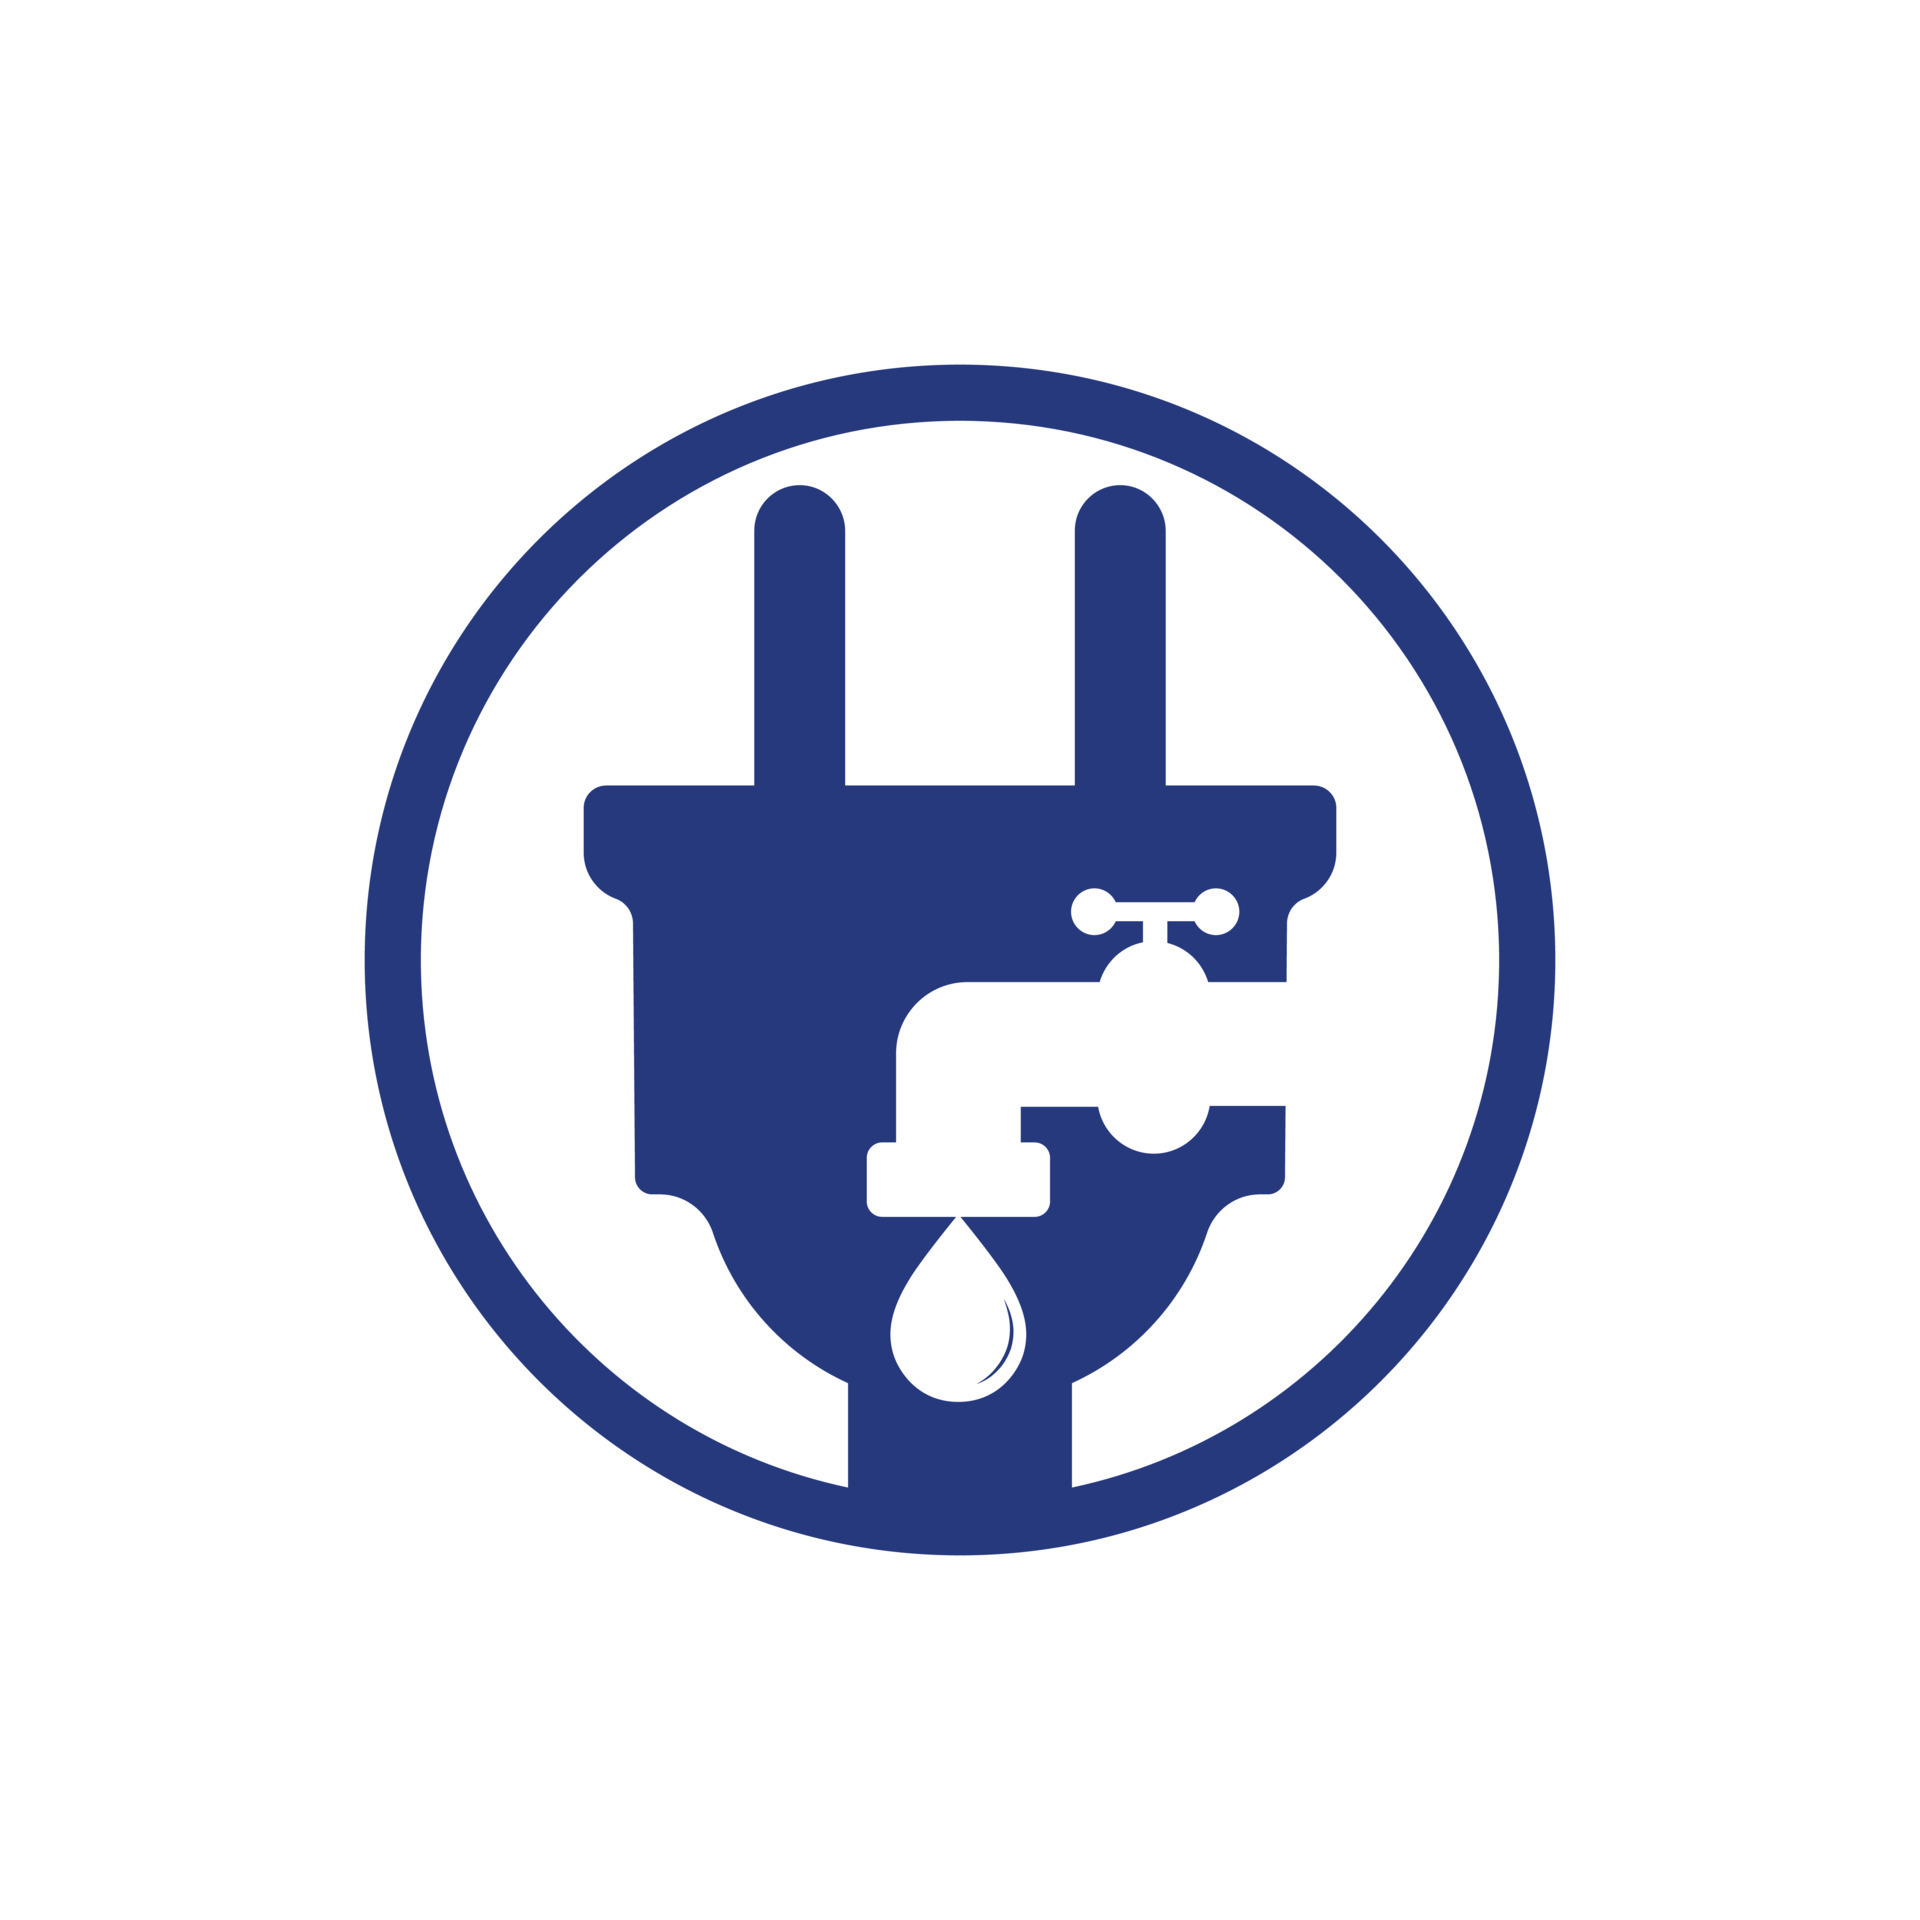 Plumbing And Electric Service Logo Design Cord With Water Faucet Icon